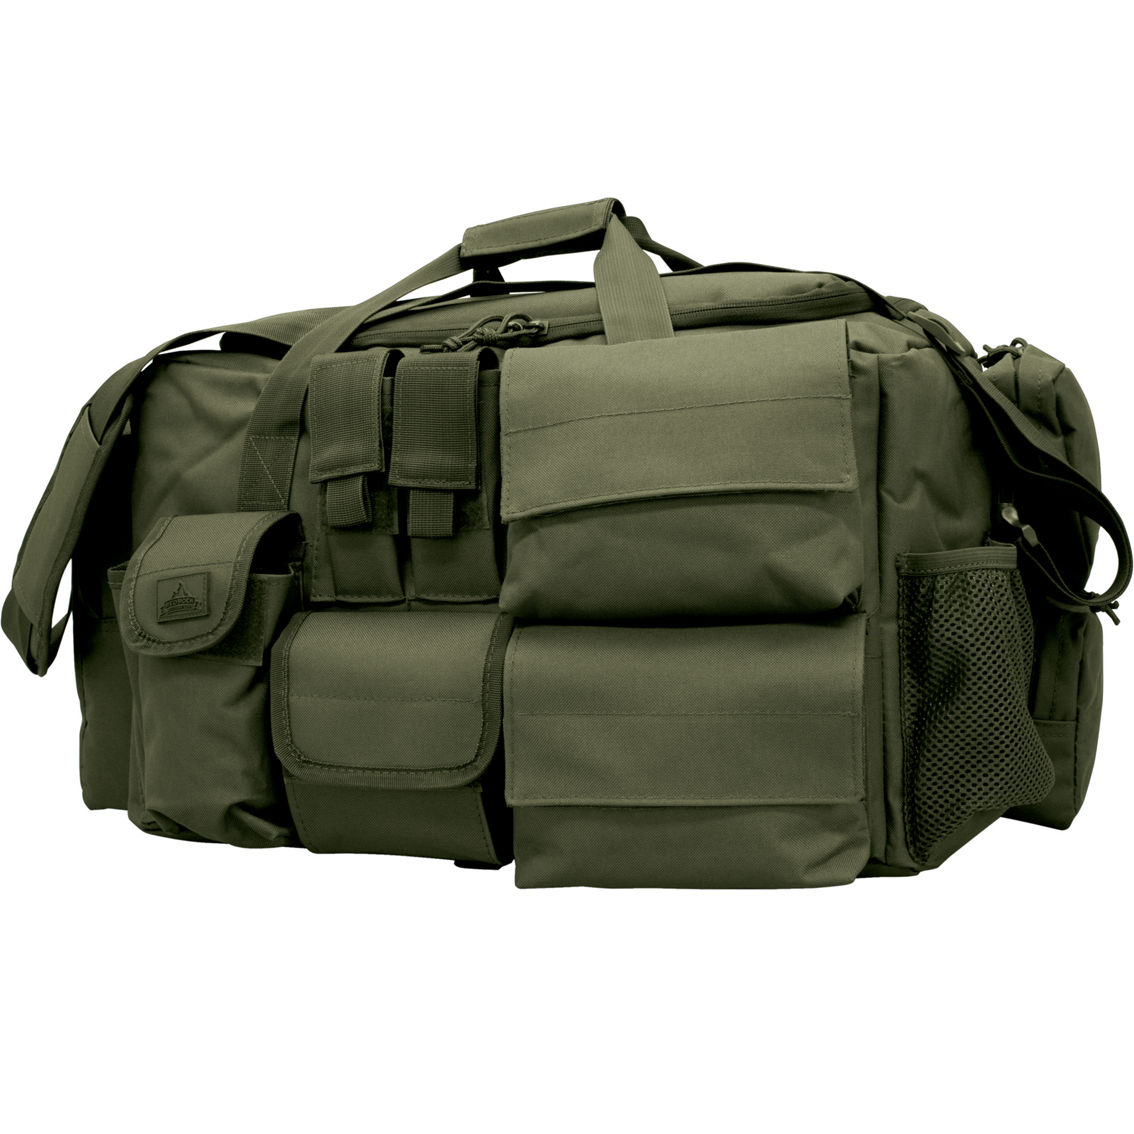 Red Rock Outdoor Gear Operations Duffel Bag - Image 3 of 6